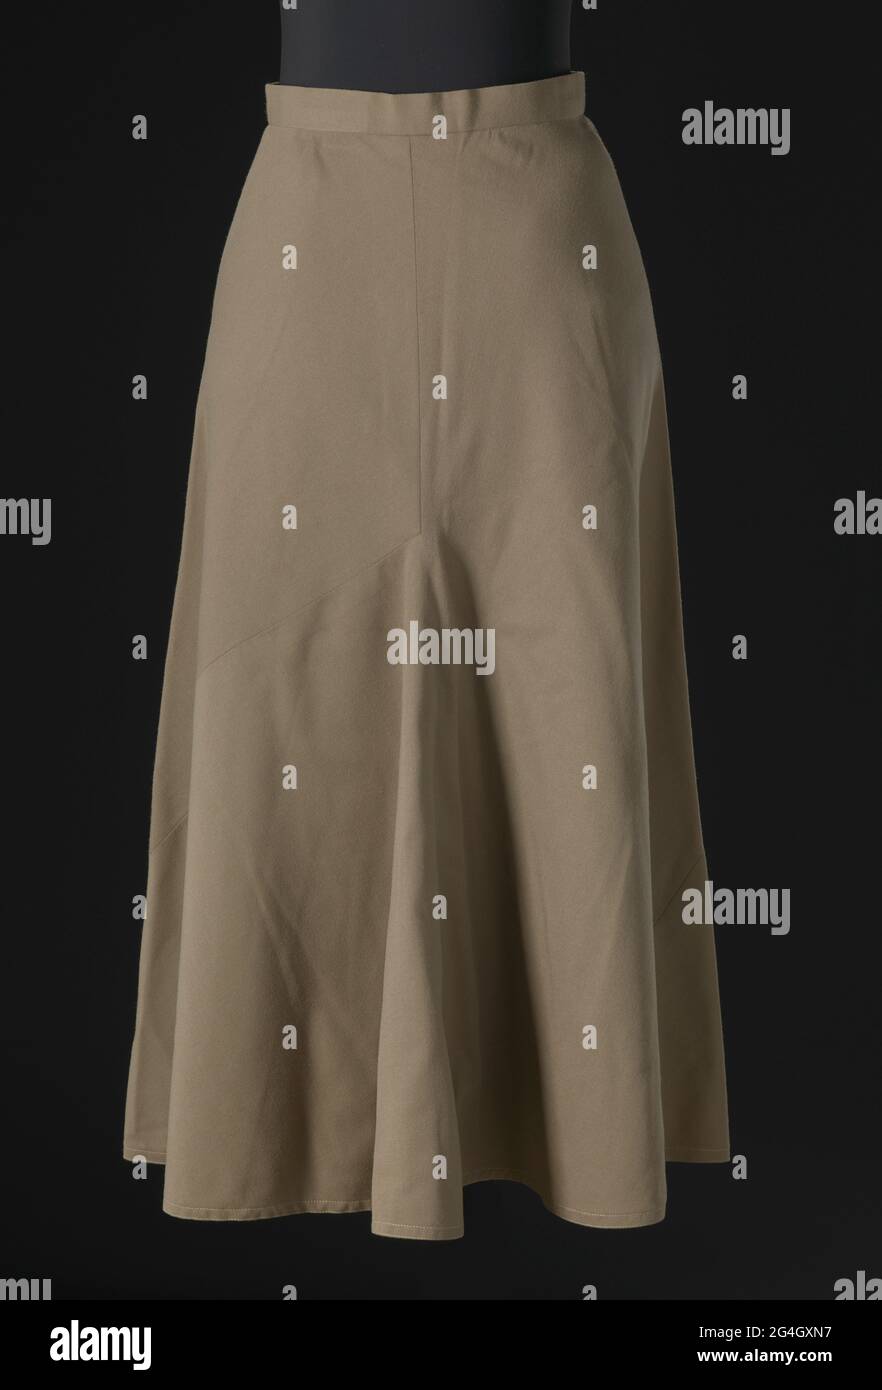 Taupe wool twill skirt designed by Arthur McGee. The skirt is made from two (2) pieces of fabric cut in the same asymmetric shape and then sewn together, with the pieces wrapping around the body and creating a full circle flair skirt. The skirt has a short waistband and falls just below the knee. It closes at the center back waist with a zipper and one (1) hook into a thread loop. The skirt is not lined and there are no labels. In 1957, Arthur Lee McGee (1933-2019) was the first African American designer hired to run a design studio on Seventh Avenue in the Garment District in New York City. Stock Photo